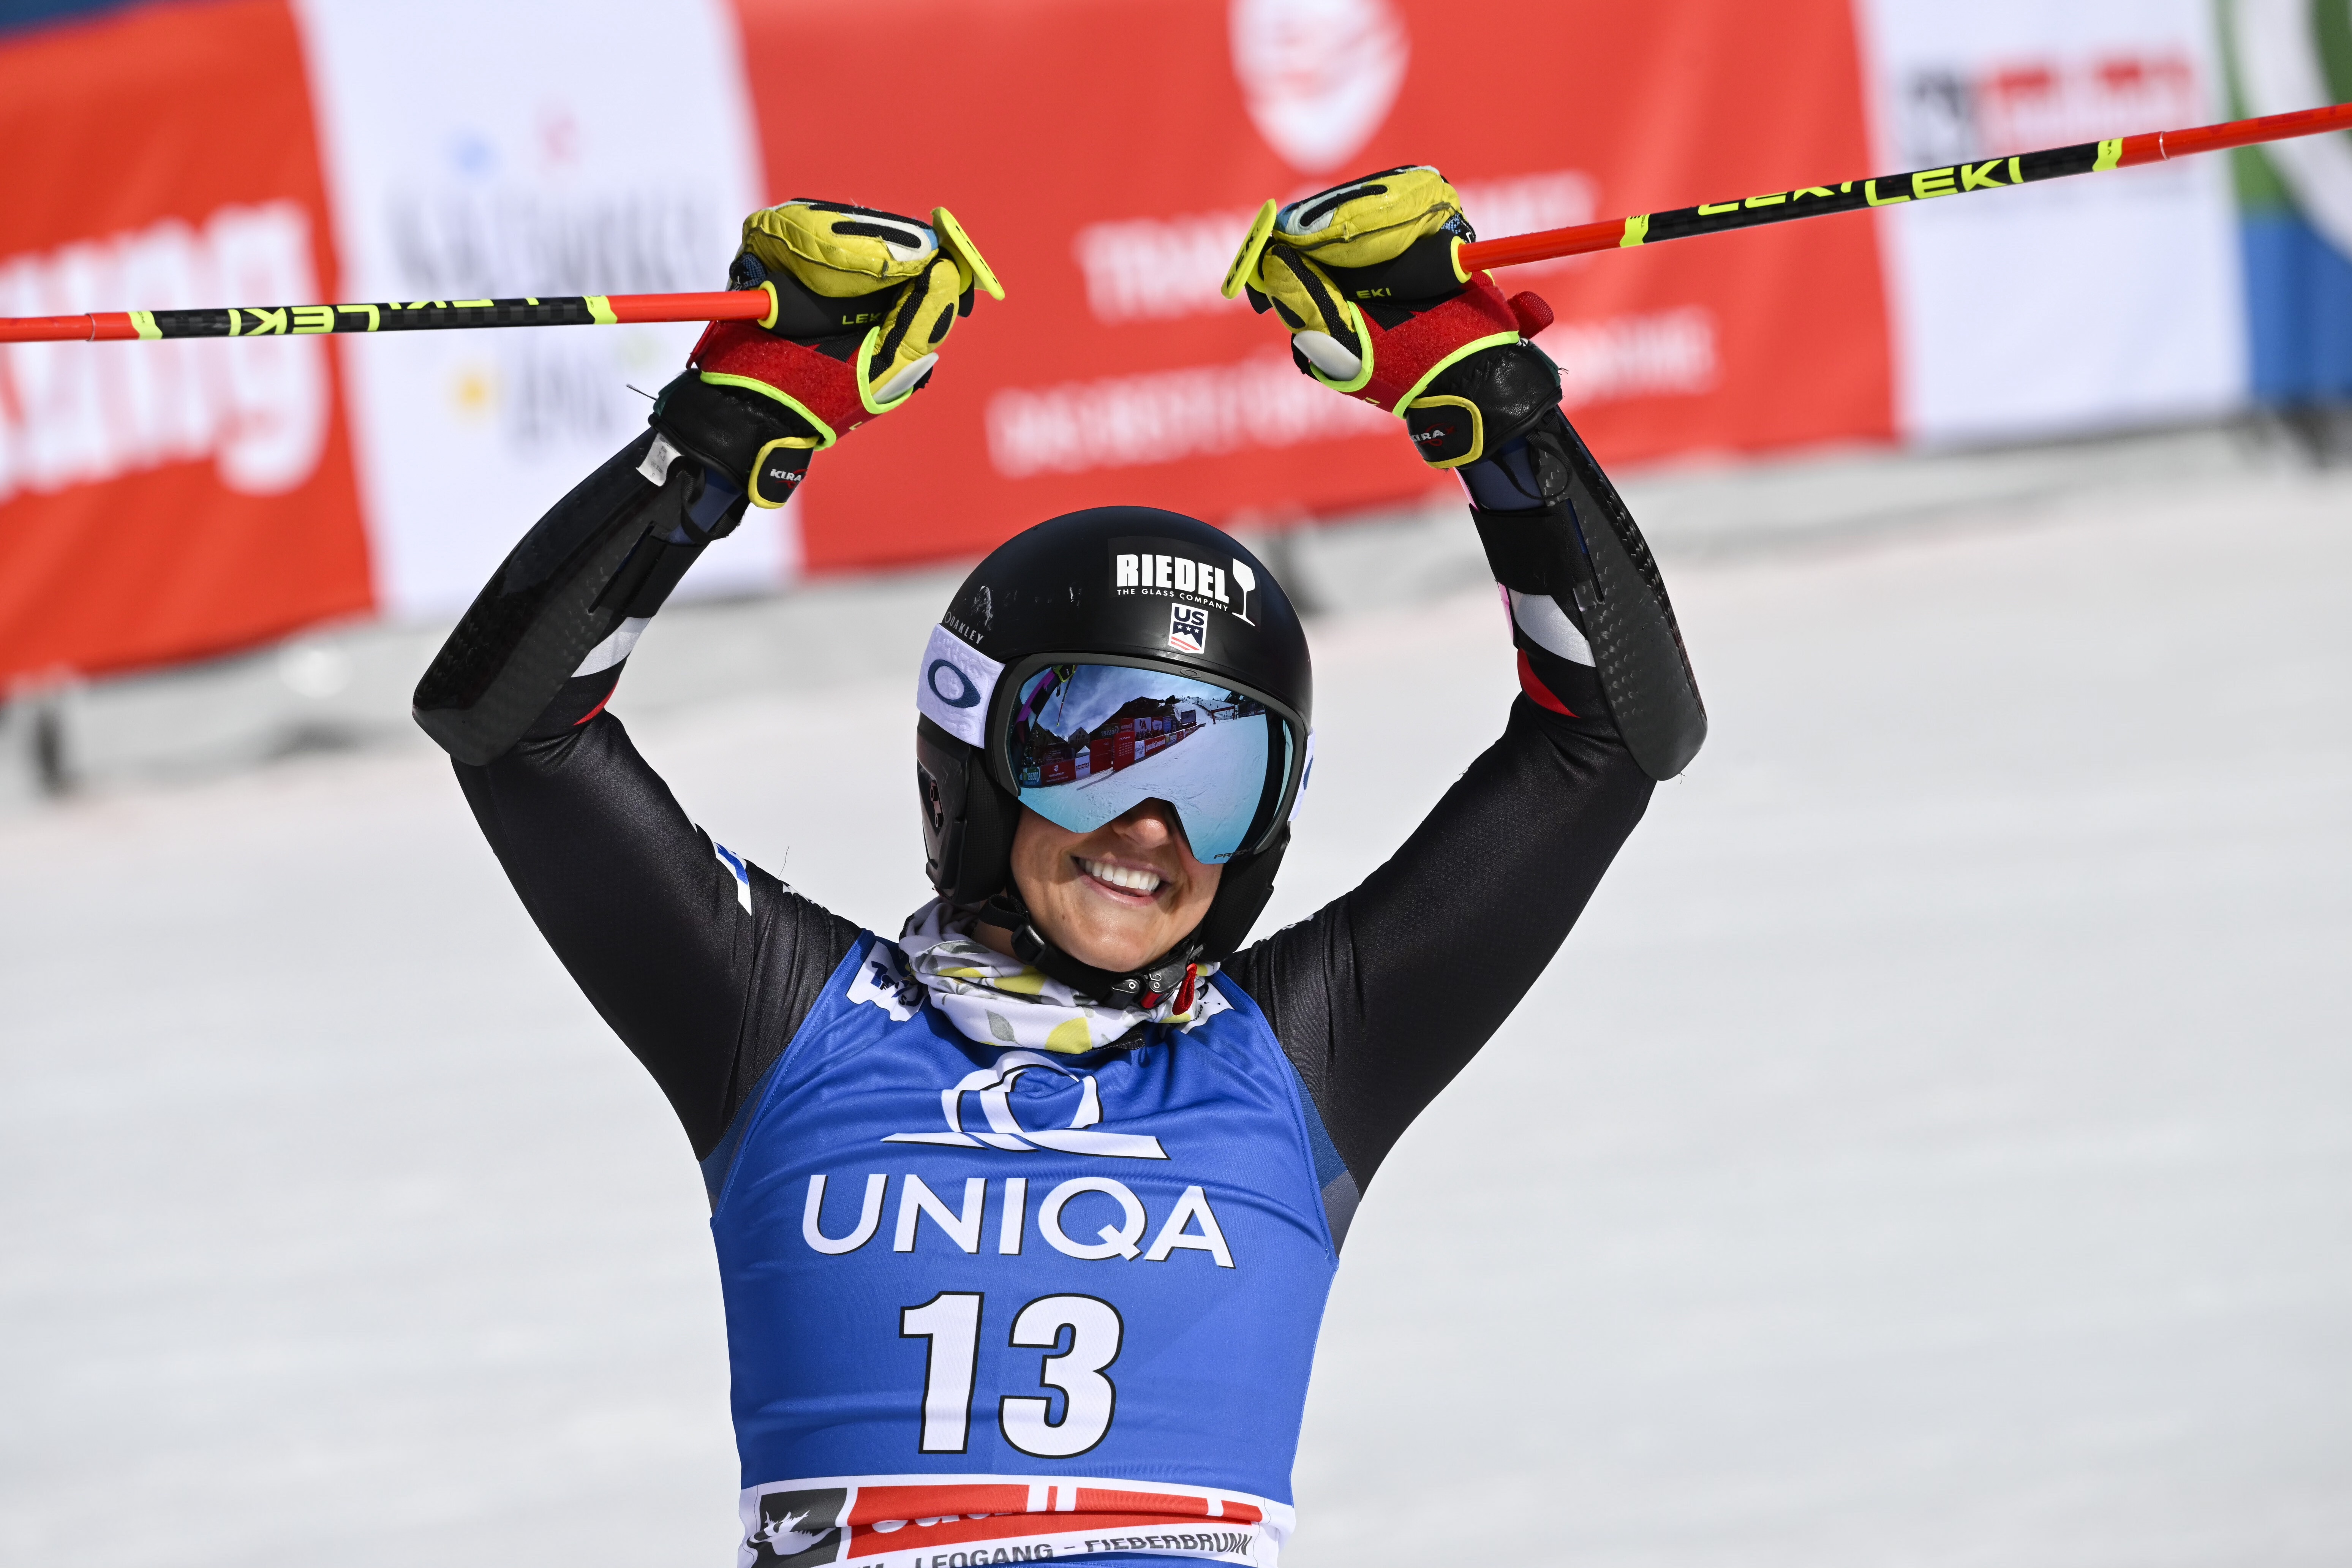 Nordic Showdown: Top biathletes gear up for thrilling weekend at